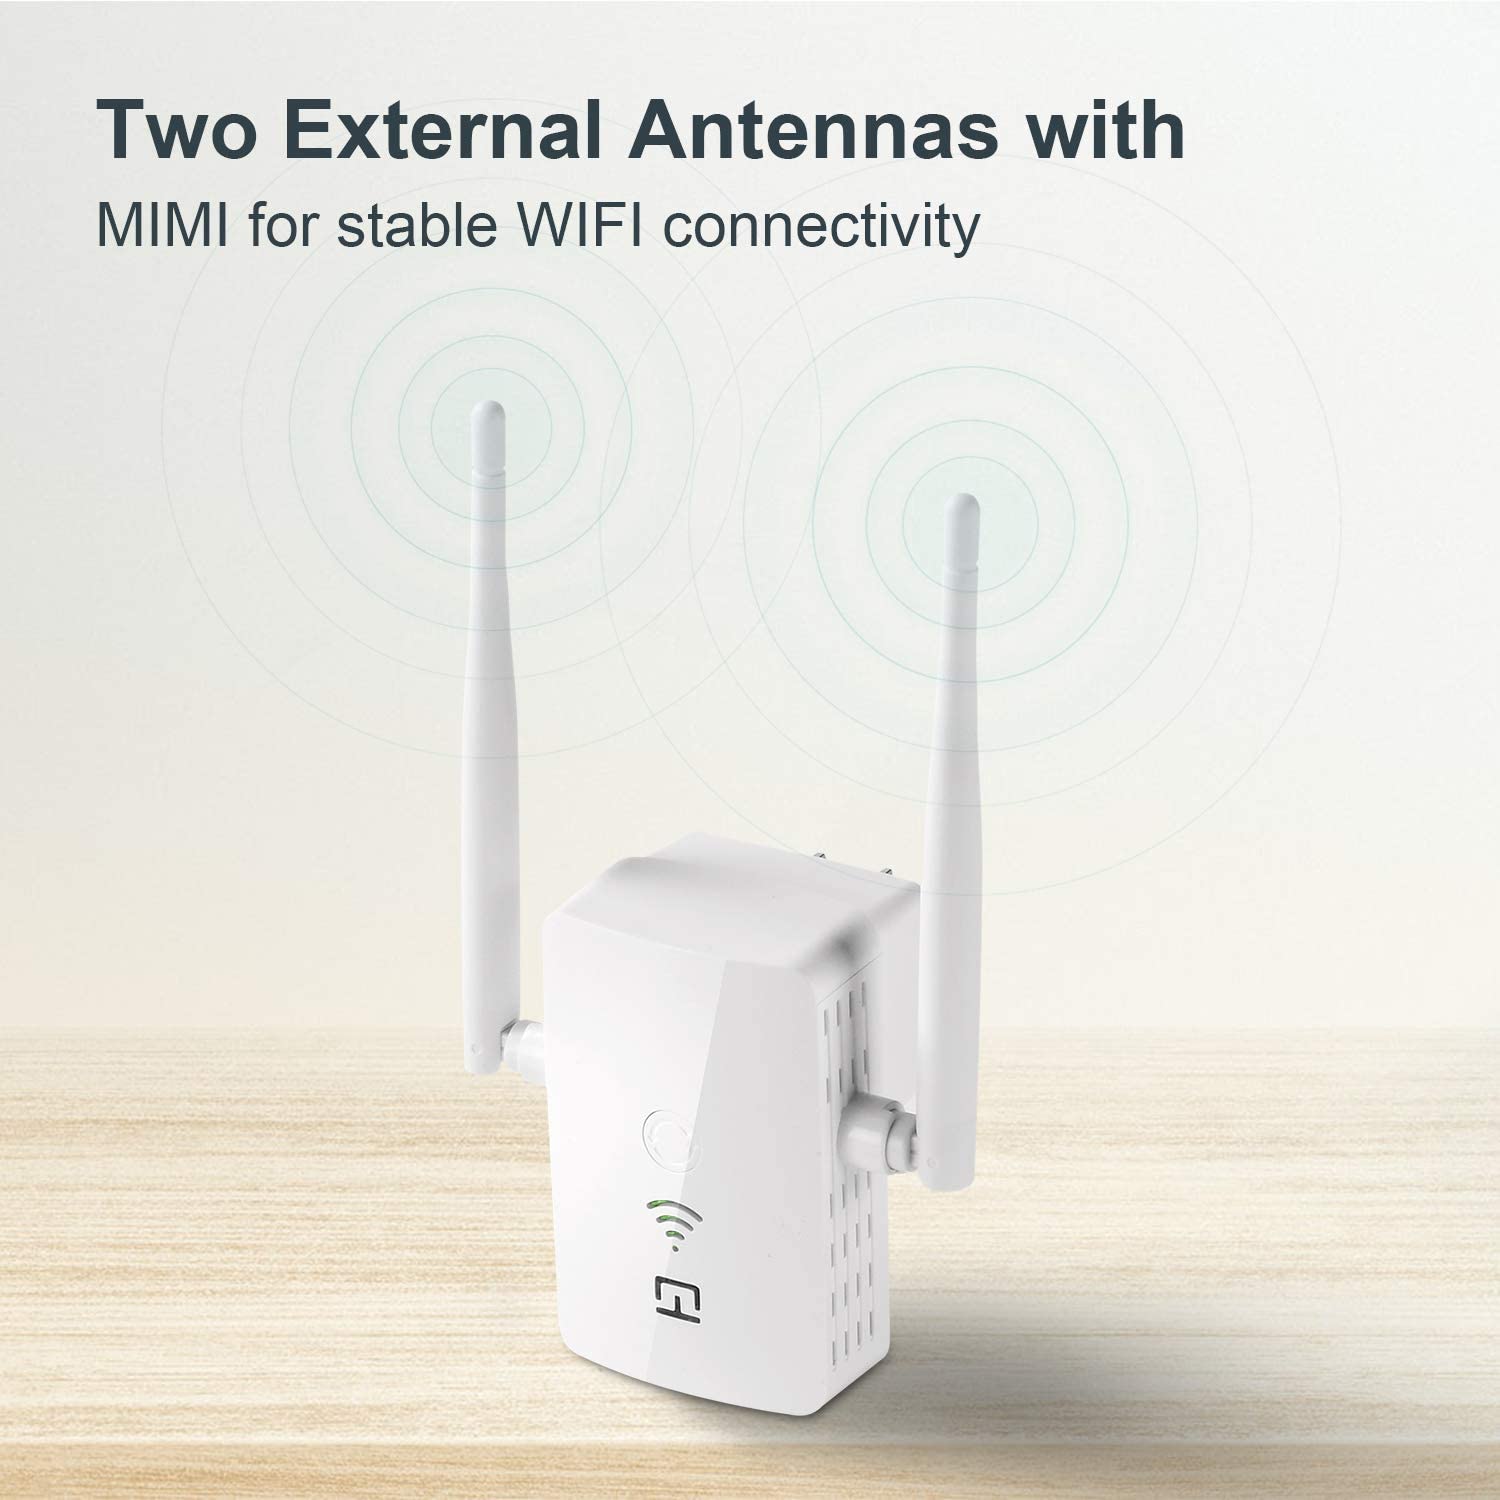 WiFi Range Extender, 2.4 & 5GHz Dual Band High Speed up to 1200 Mbps WiFi Repeater Wireless Signal Booster, Wide Coverage Eliminate WiFi Dead Zones, Support WPS 1 Button Setup with 2 External Antennas